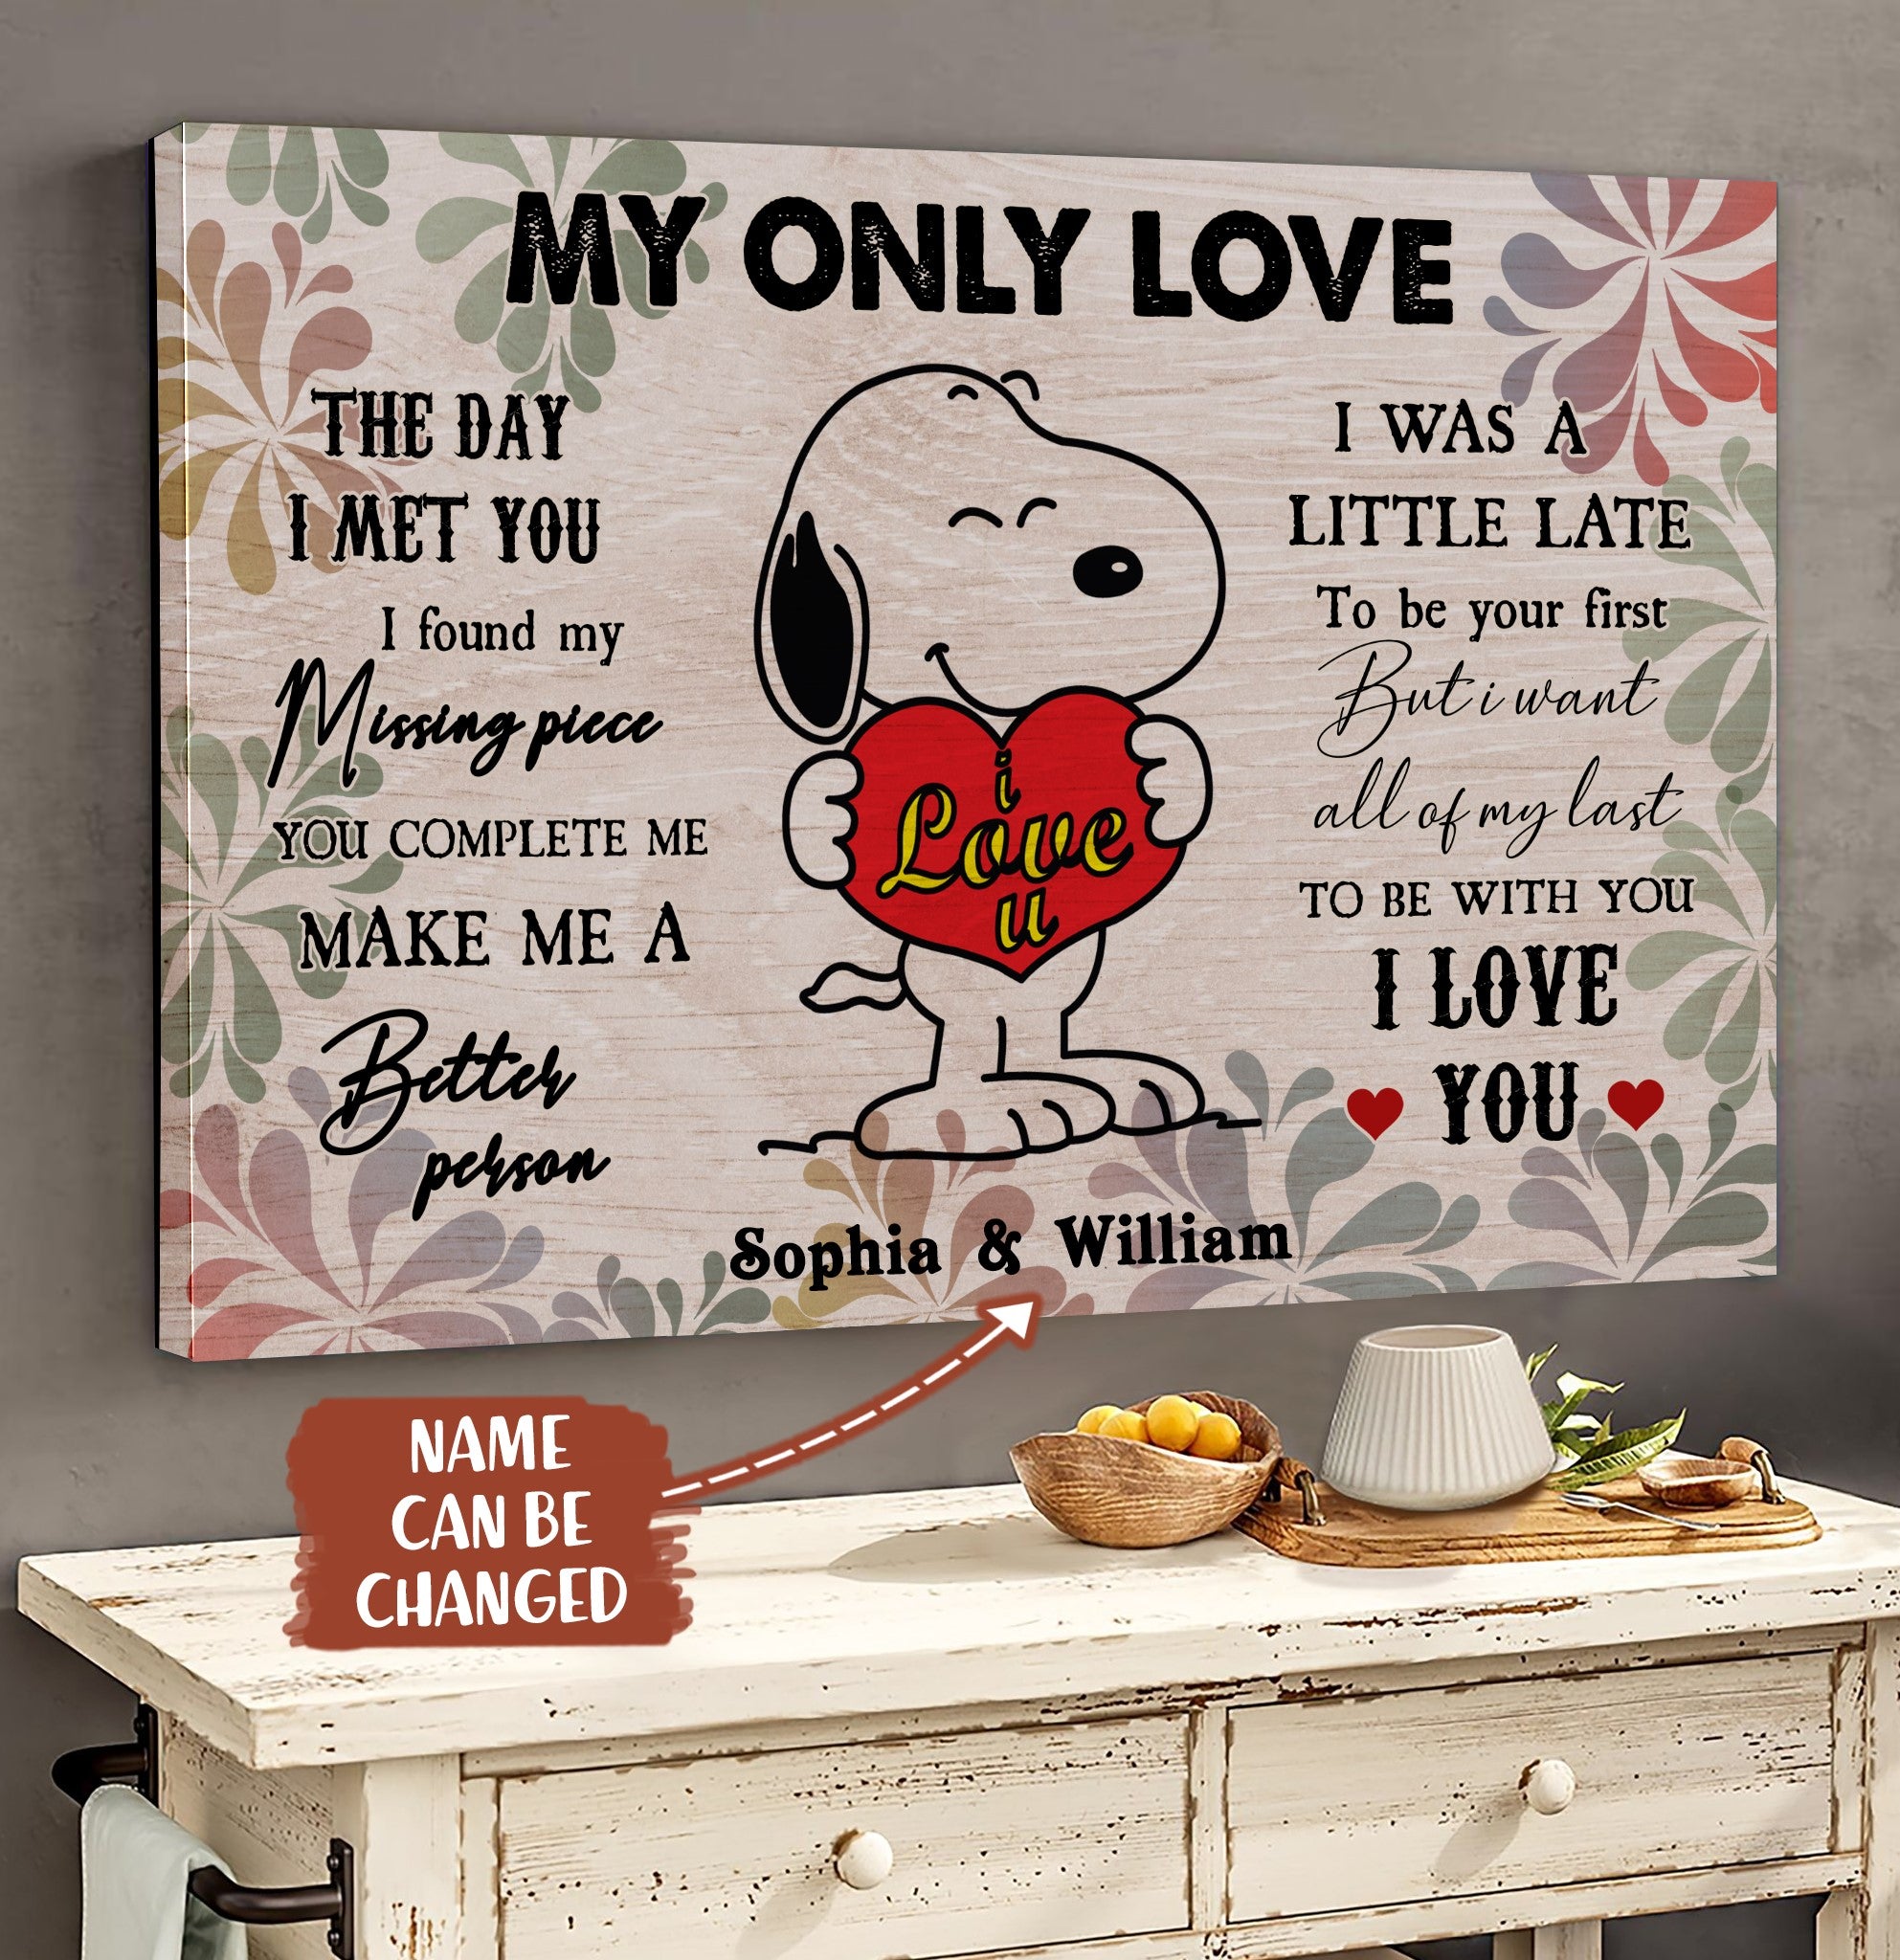 My Only Love - Personalized Canvas and Poster 0823